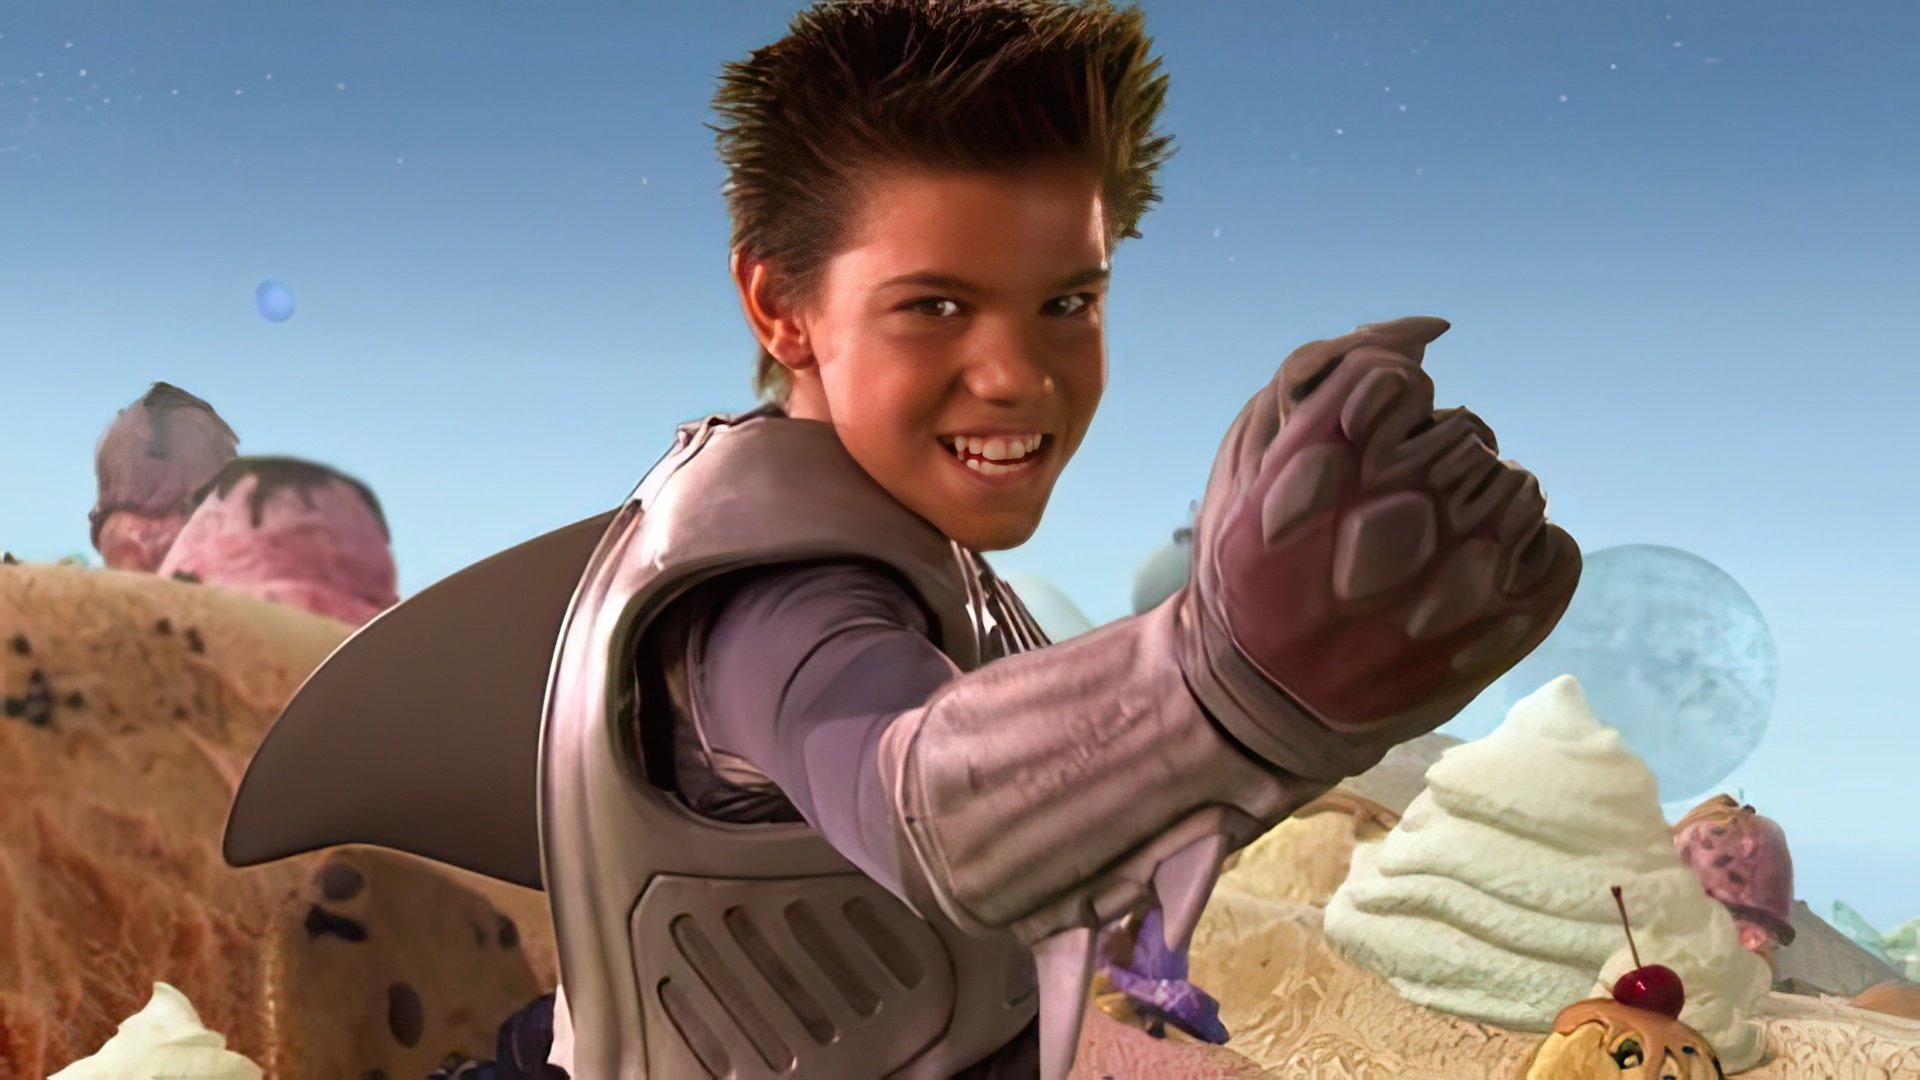 Taylor Lautner in The Adventures of Sharkboy and Lavagirl